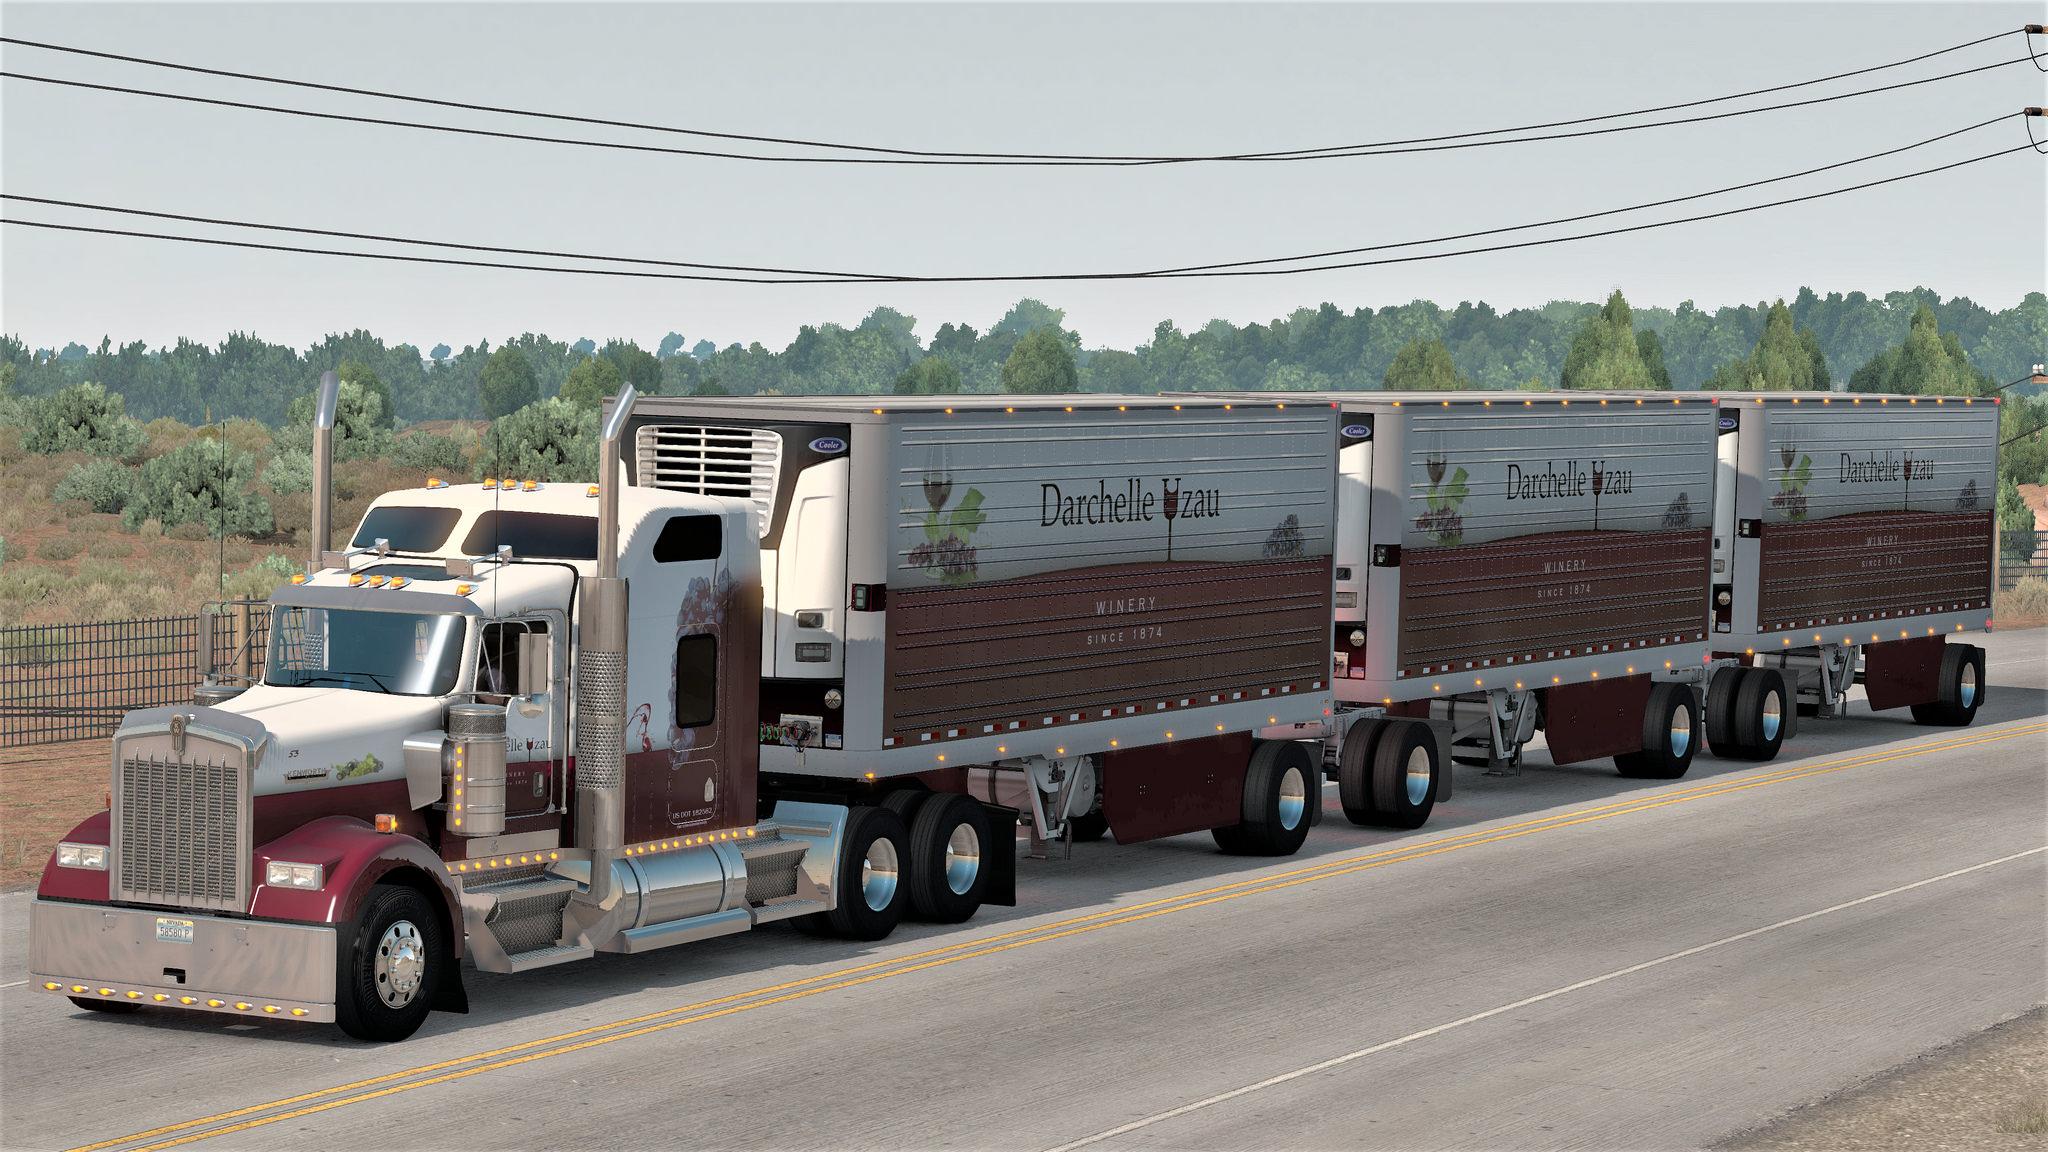 SCS Company Skins trailers-ownership v 1.0